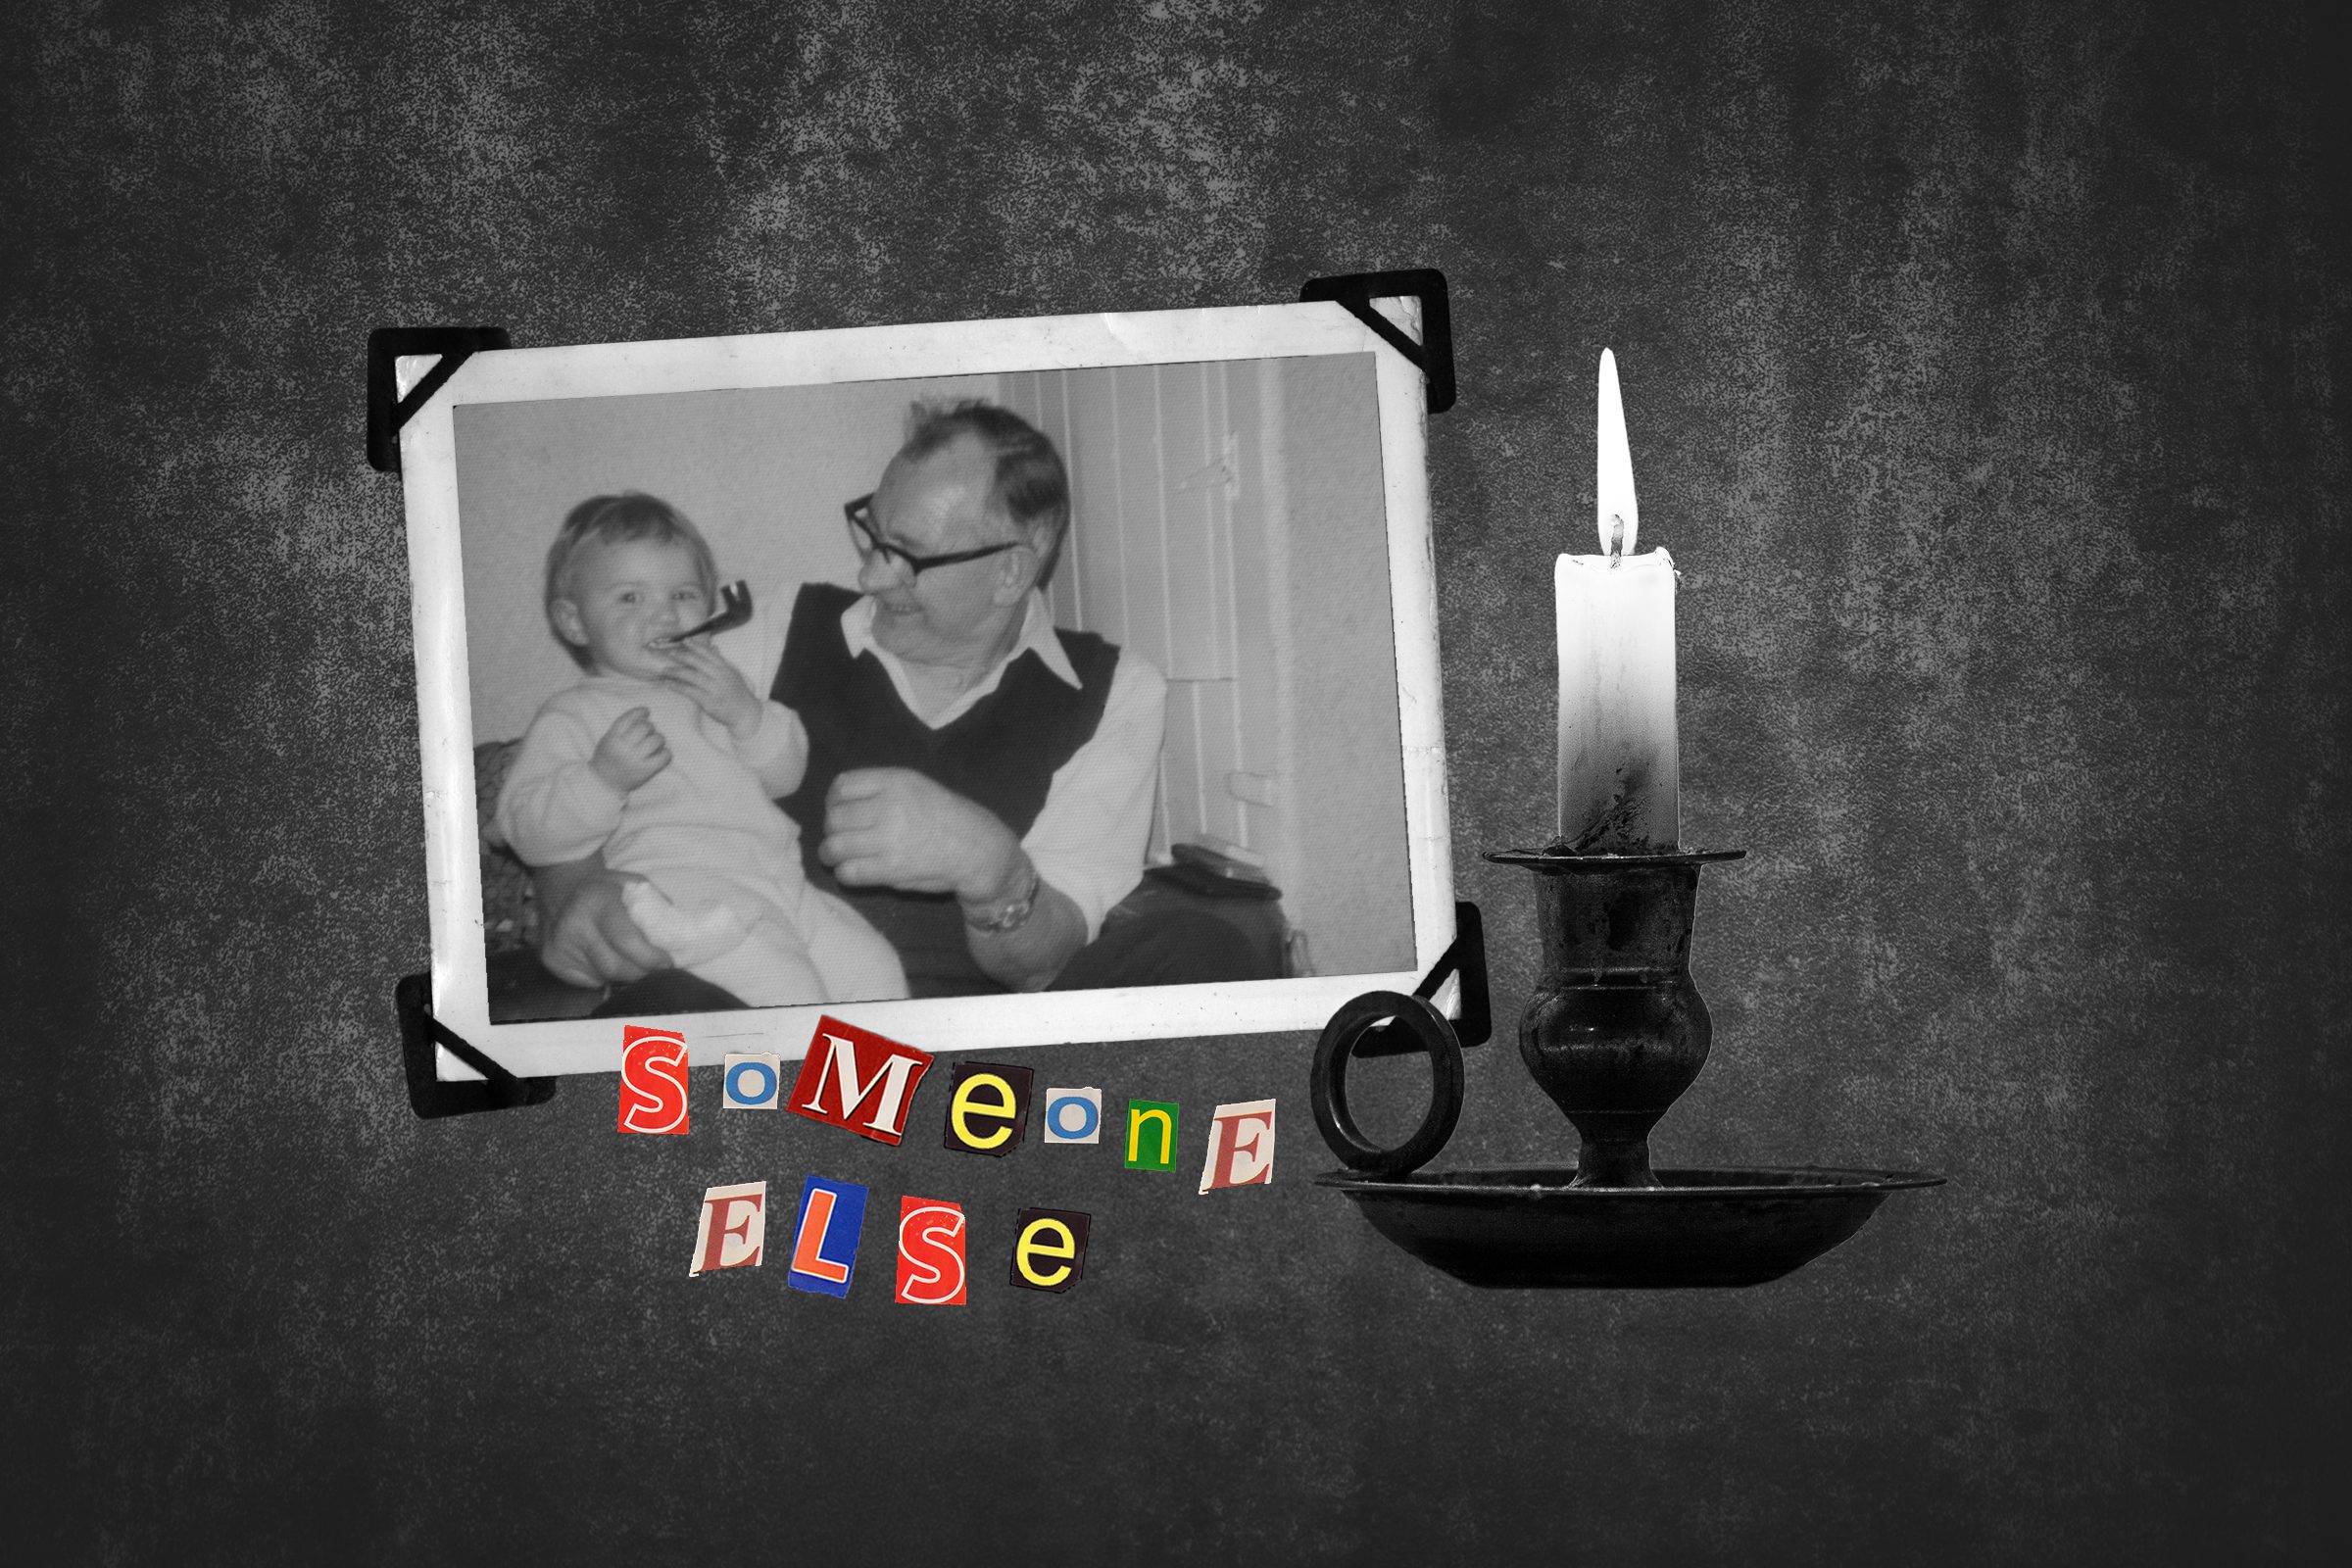 Vintage Photograph Of Grandfather And Baby Next To Candle With Text Someone Else